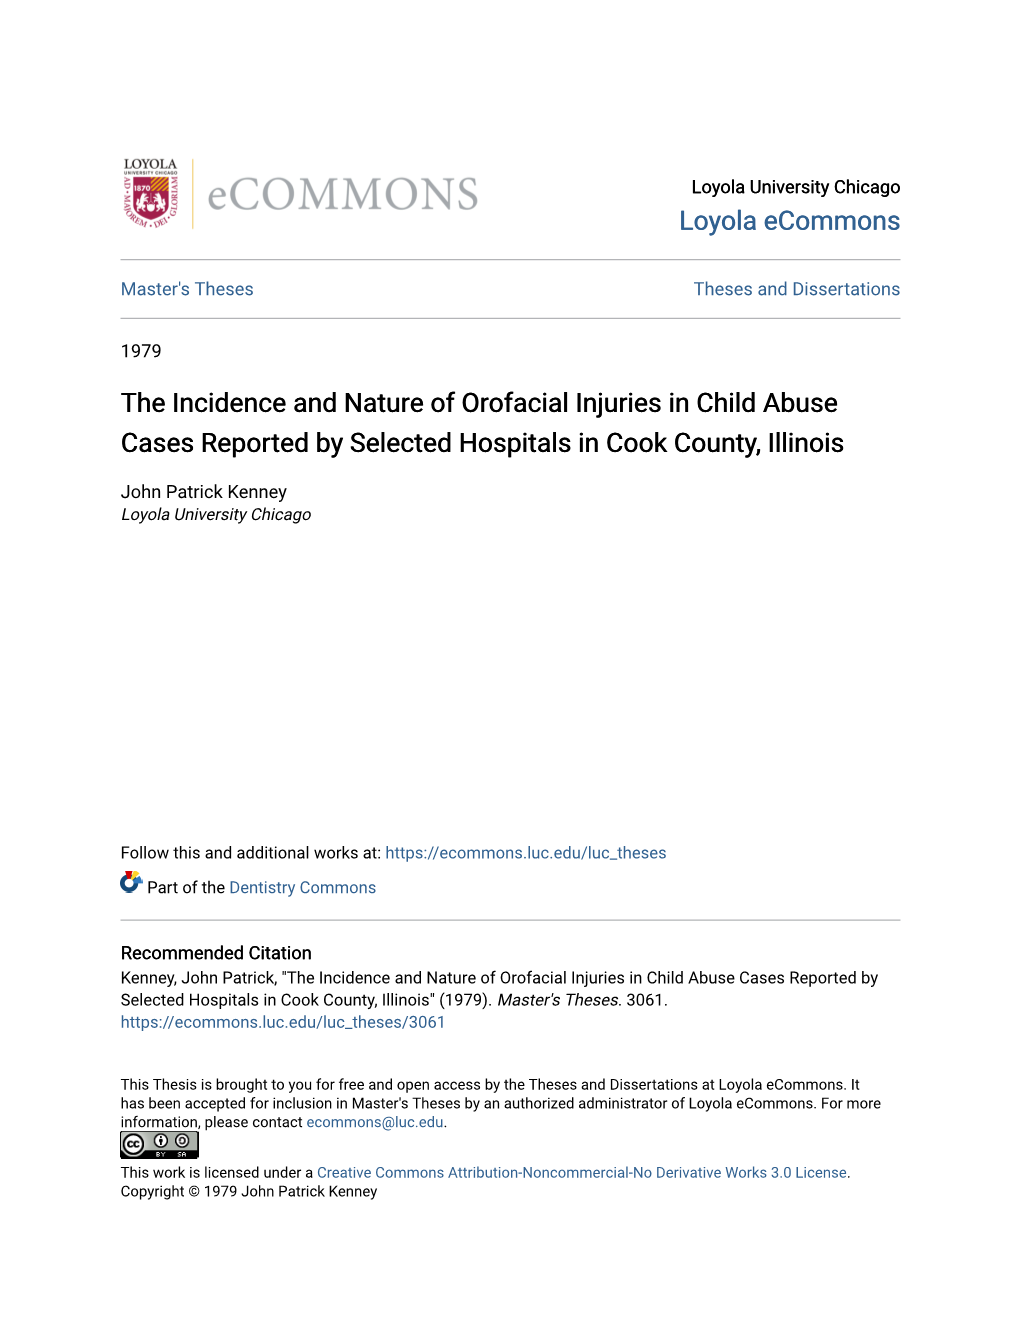 The Incidence and Nature of Orofacial Injuries in Child Abuse Cases Reported by Selected Hospitals in Cook County, Illinois